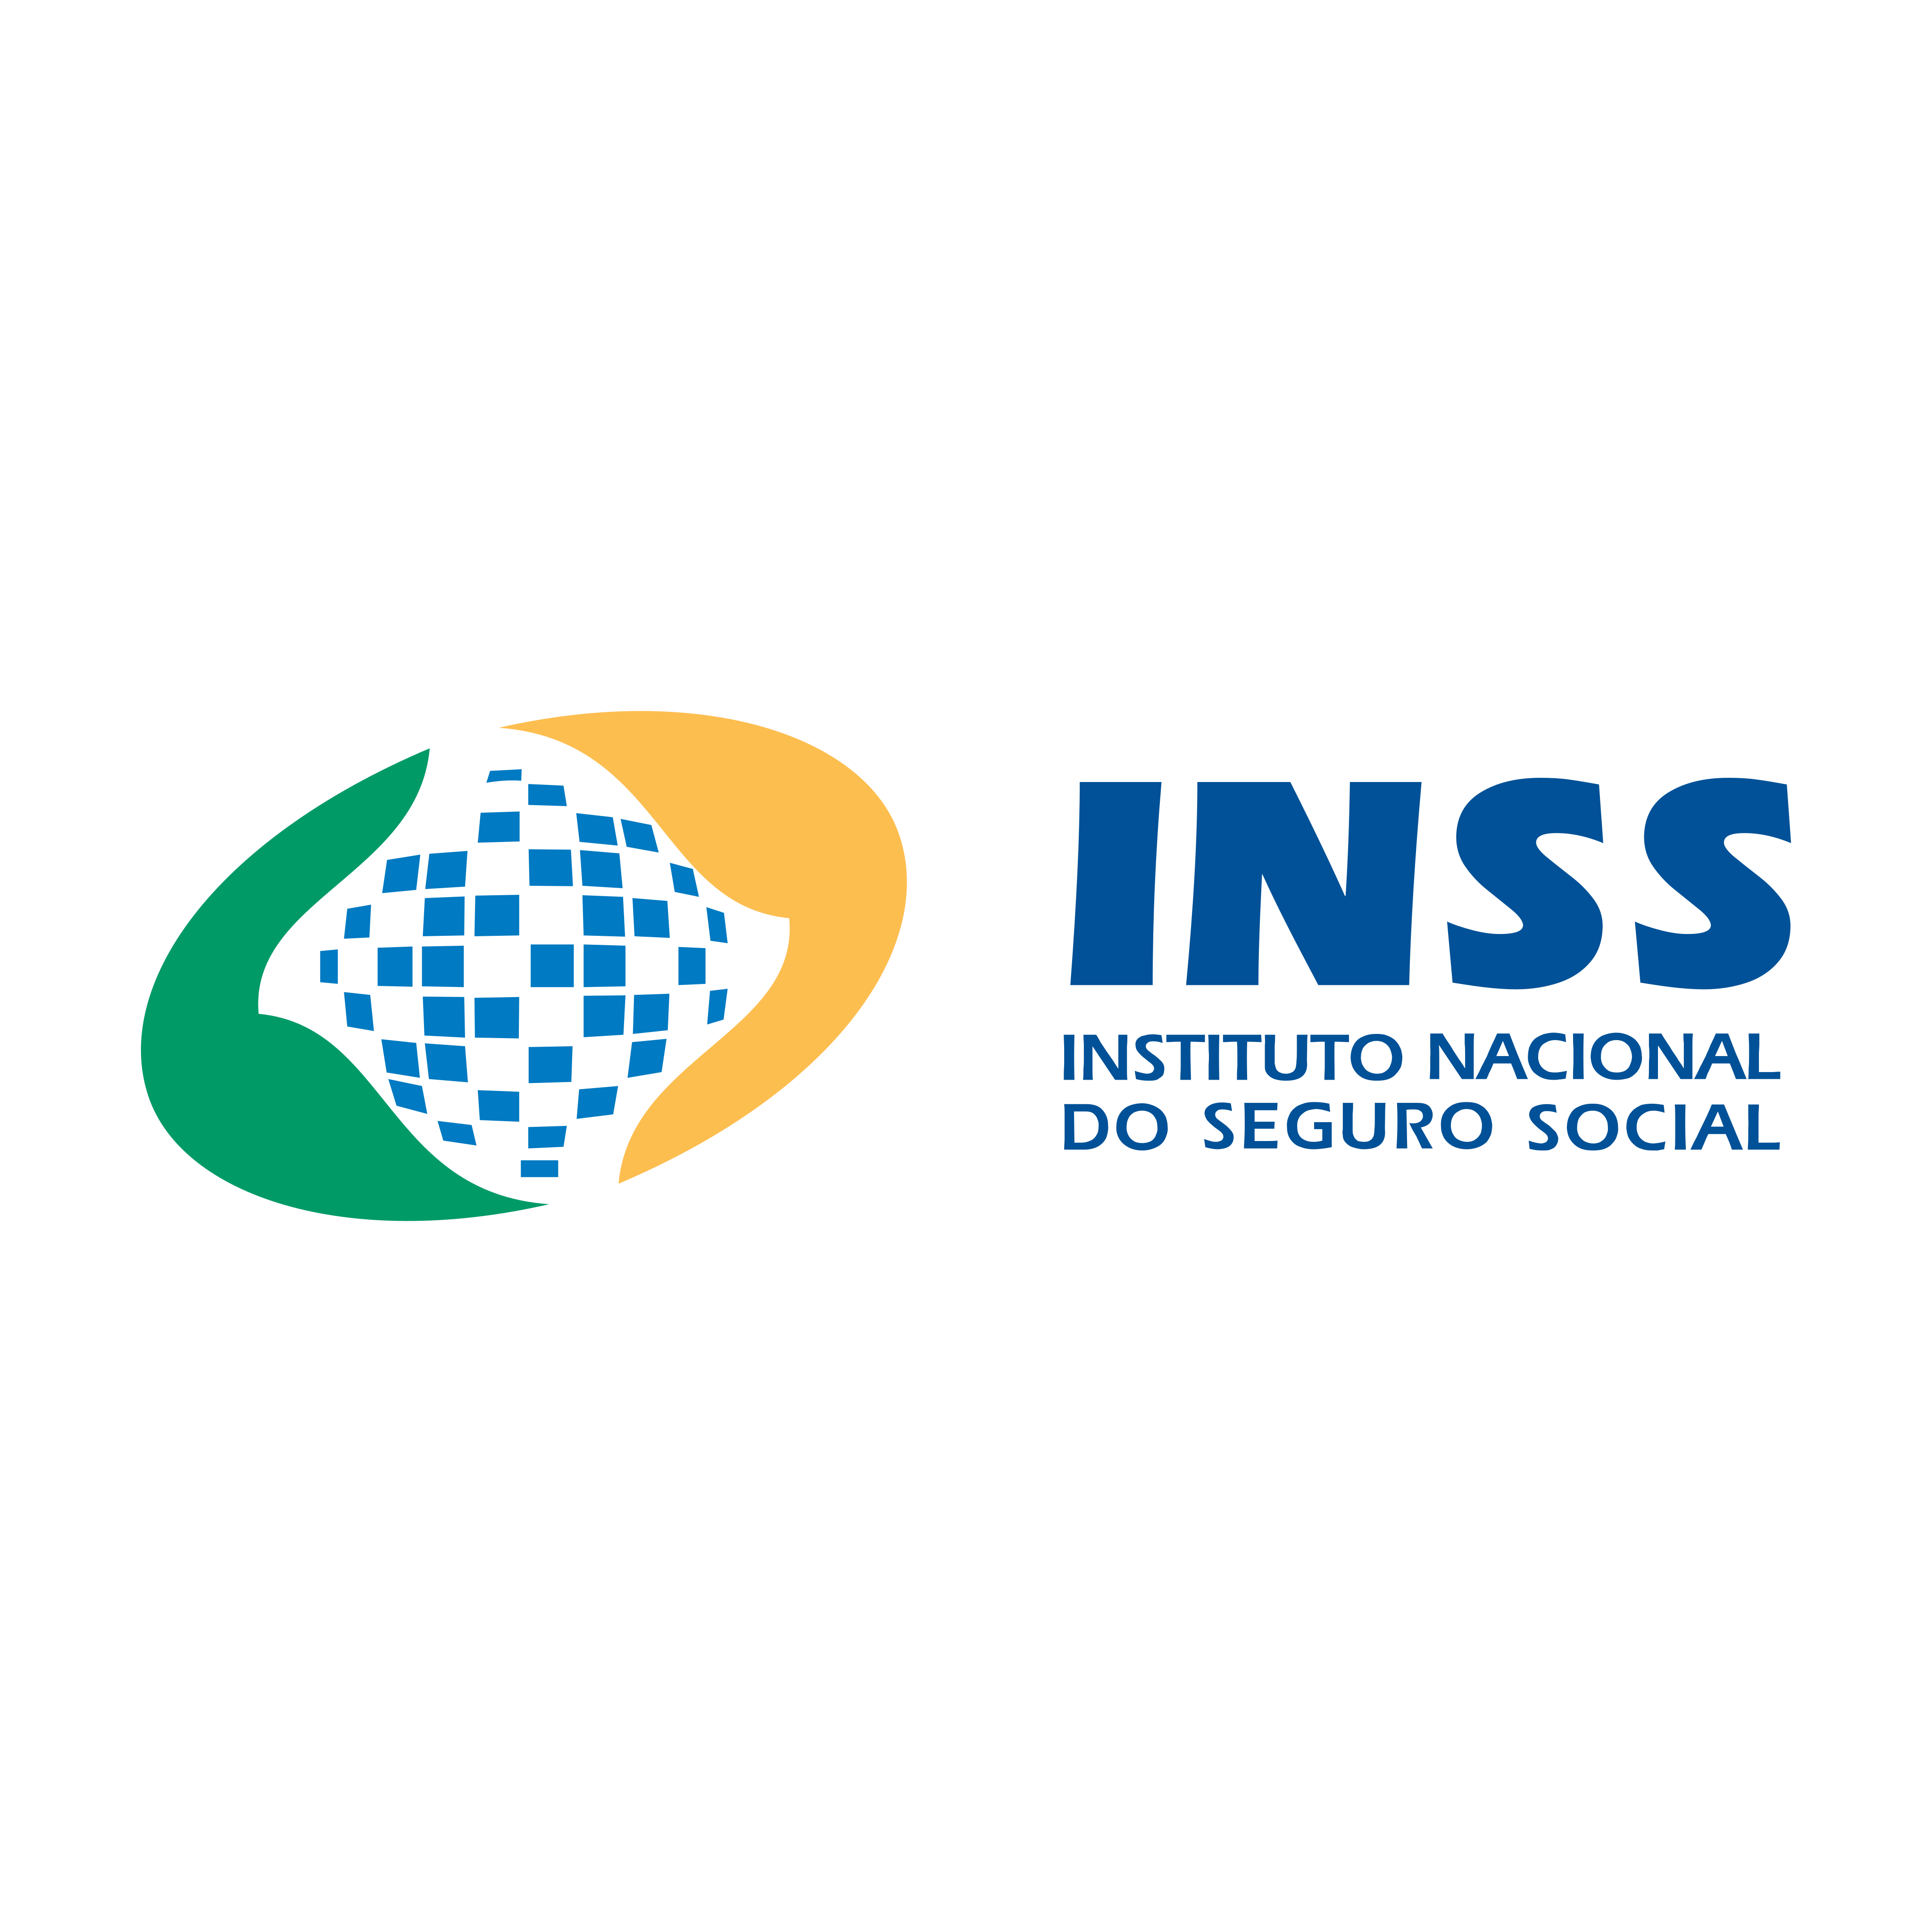 INSS Logo PNG.